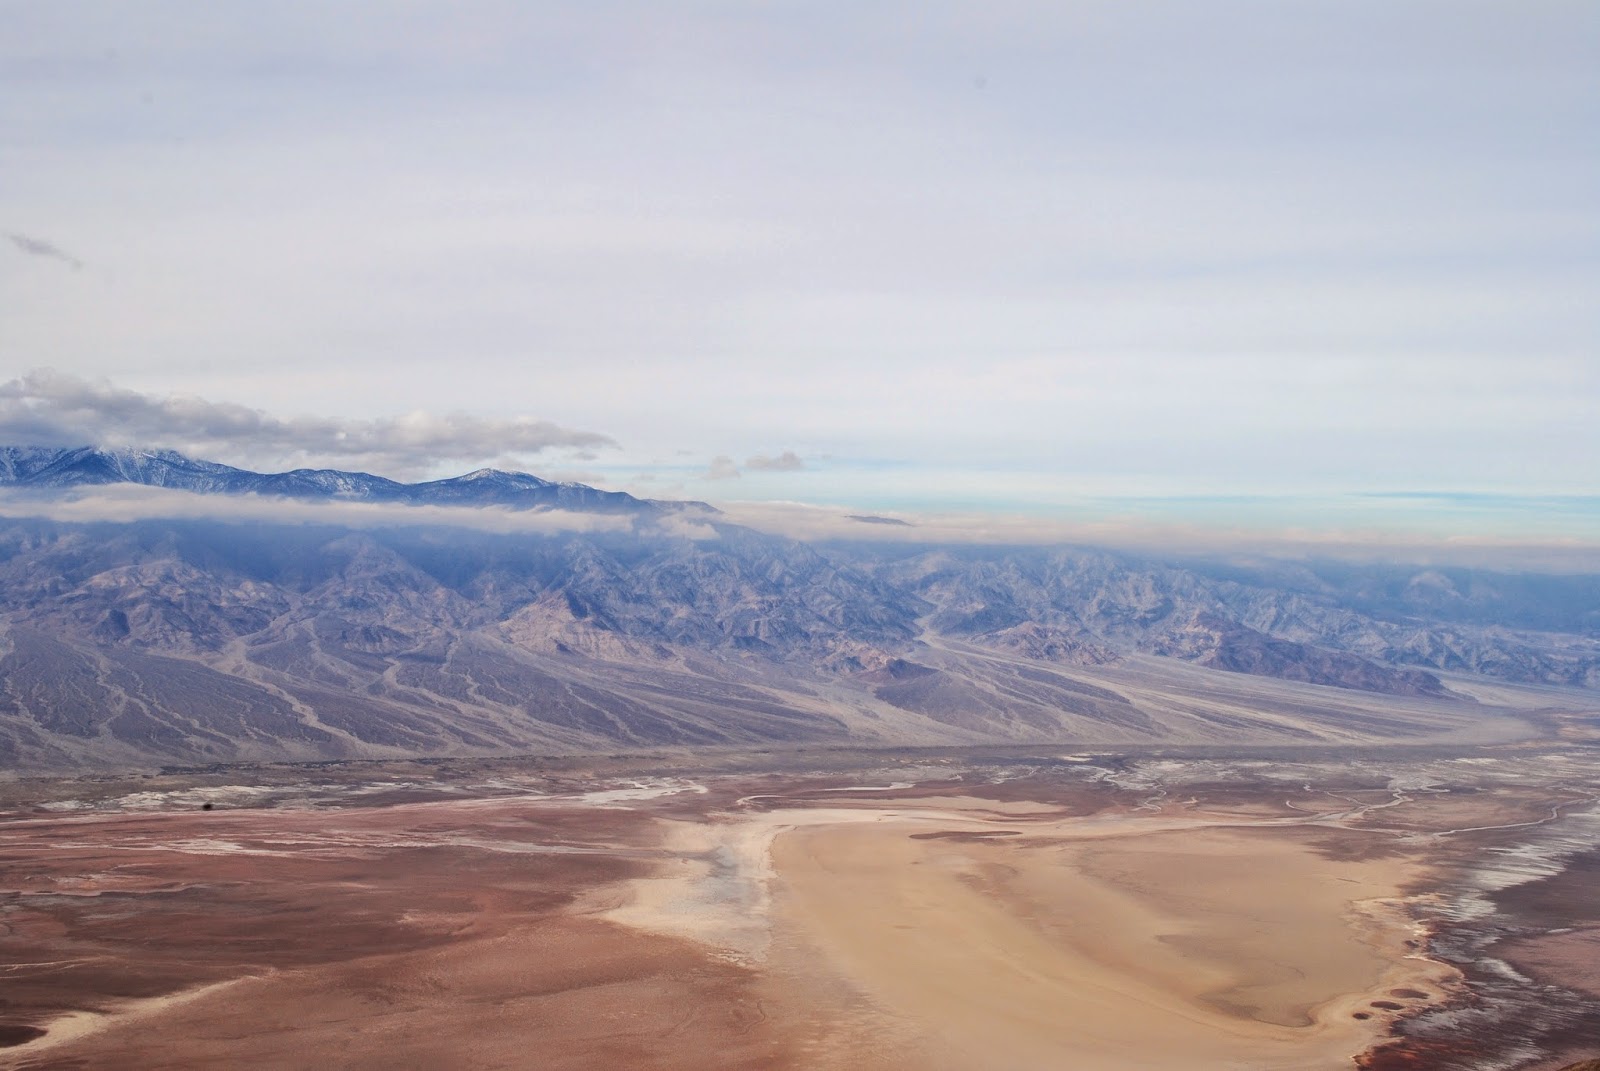 Visiting the Salt Flats at Death Valley National Park on a day trip from Las Vegas